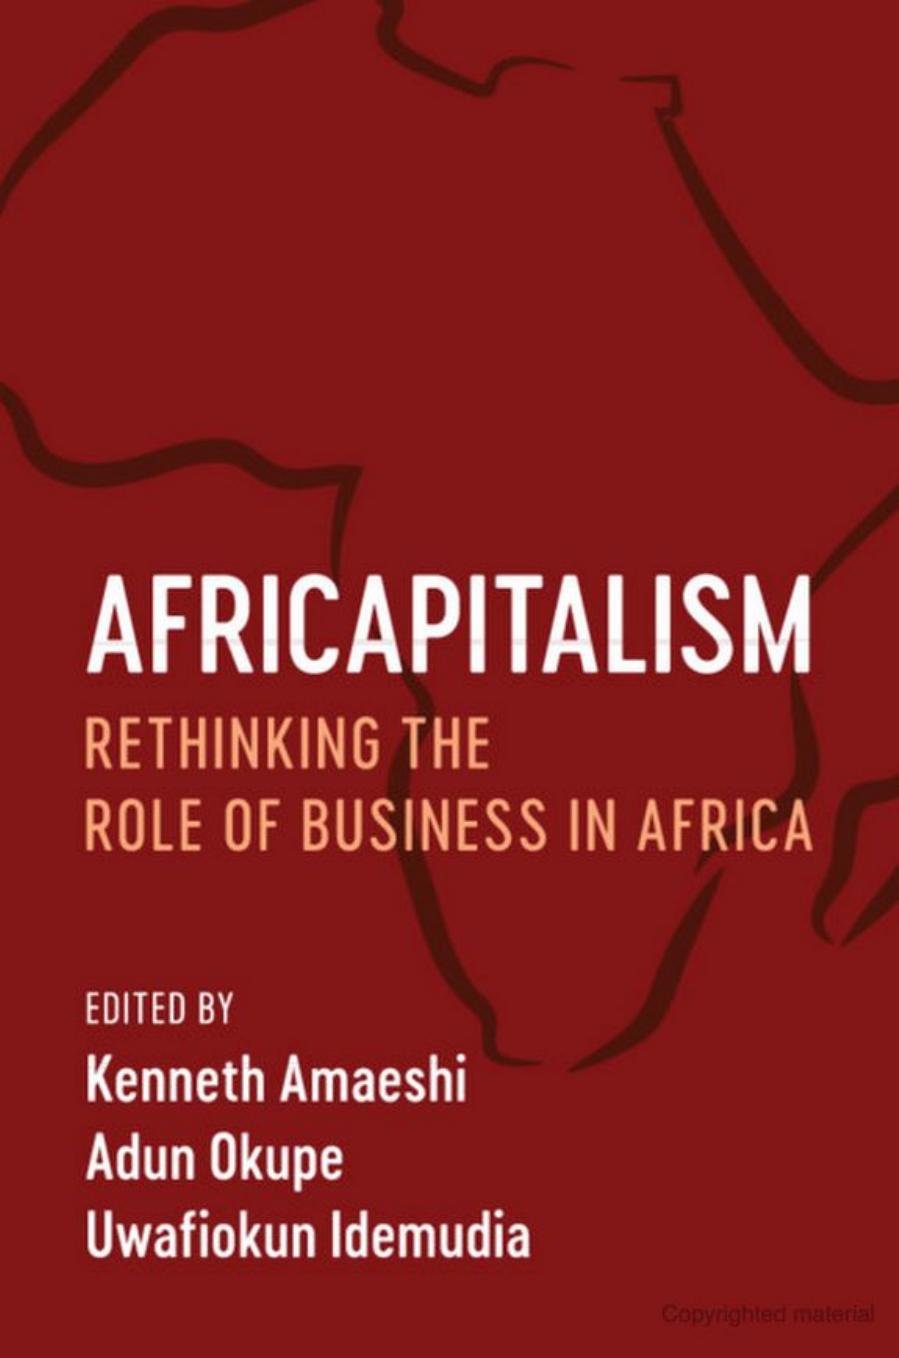 Africapitalism  Rethinking the Role of Business in Africa ( PDFDrive )2018